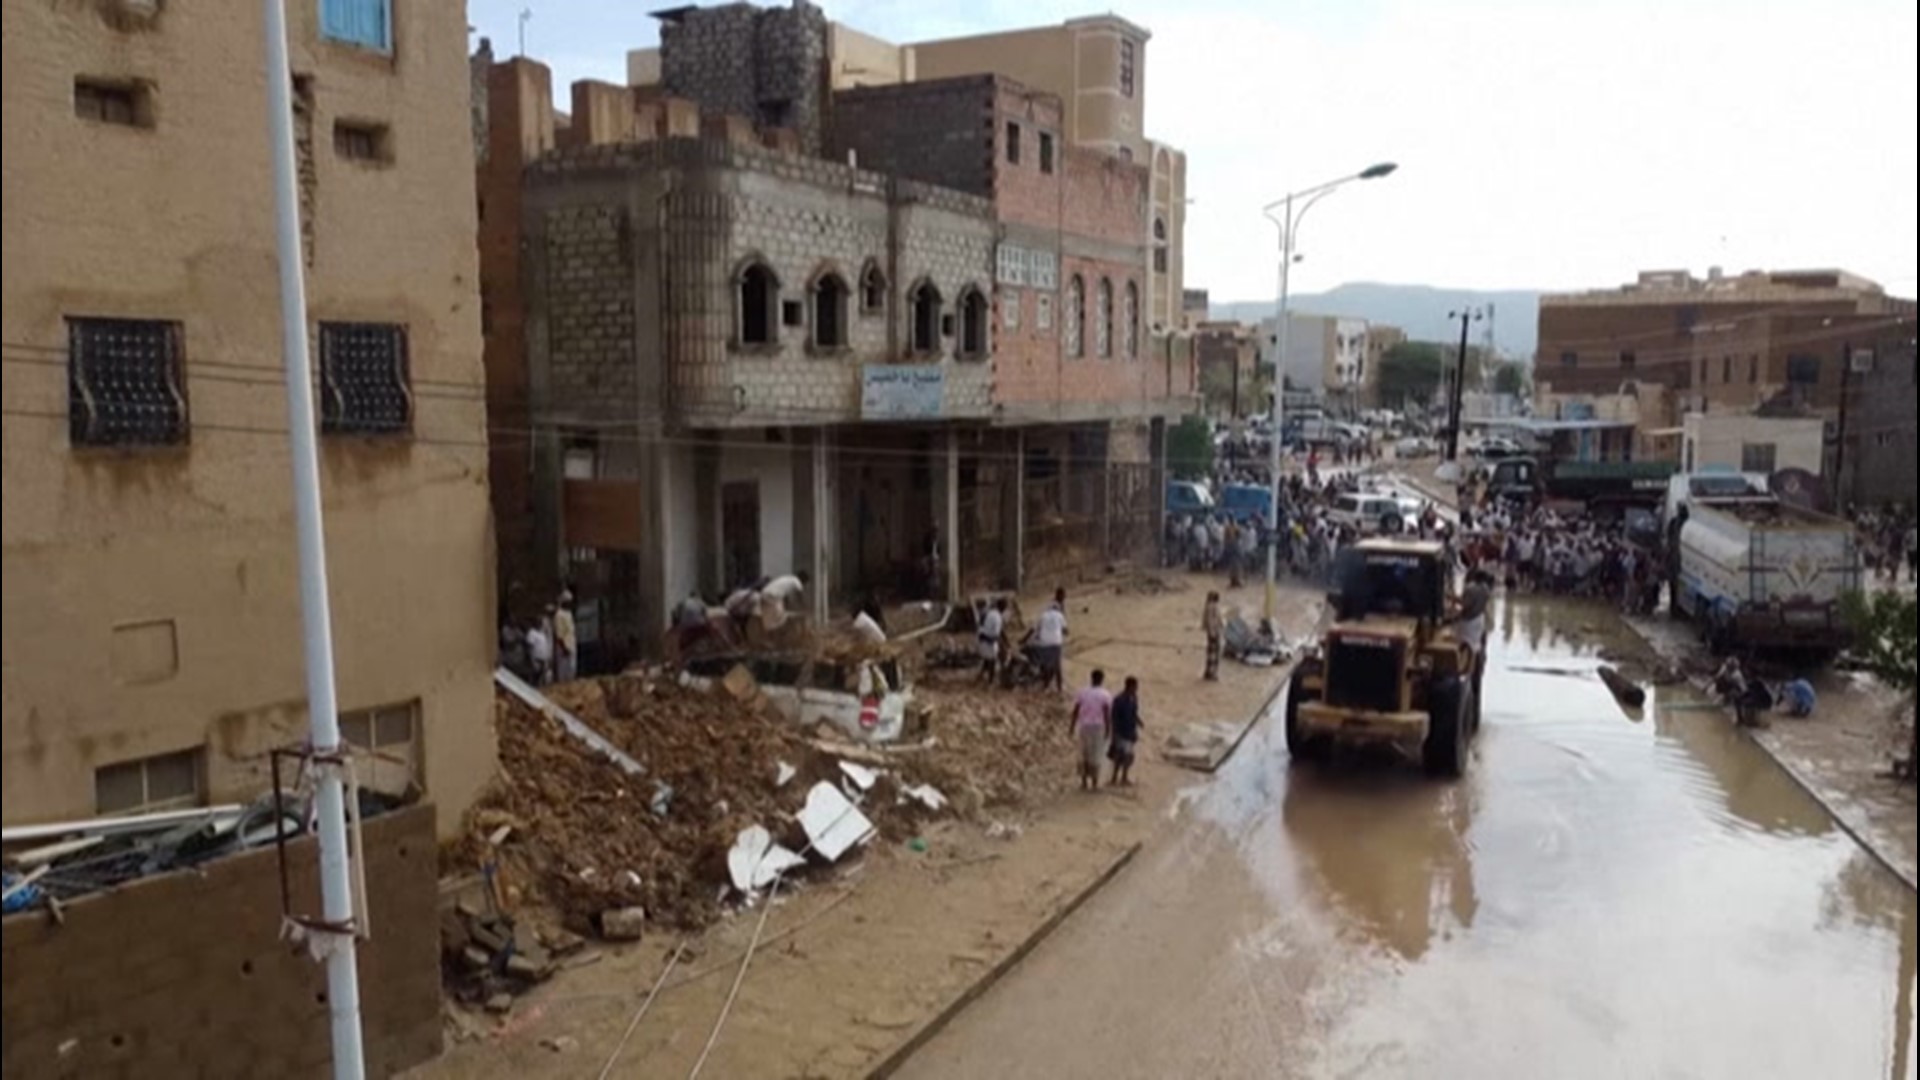 At least four people were killed and buildings were heavily damaged after flash floods swept through Tarim, Yemen, on May 3.